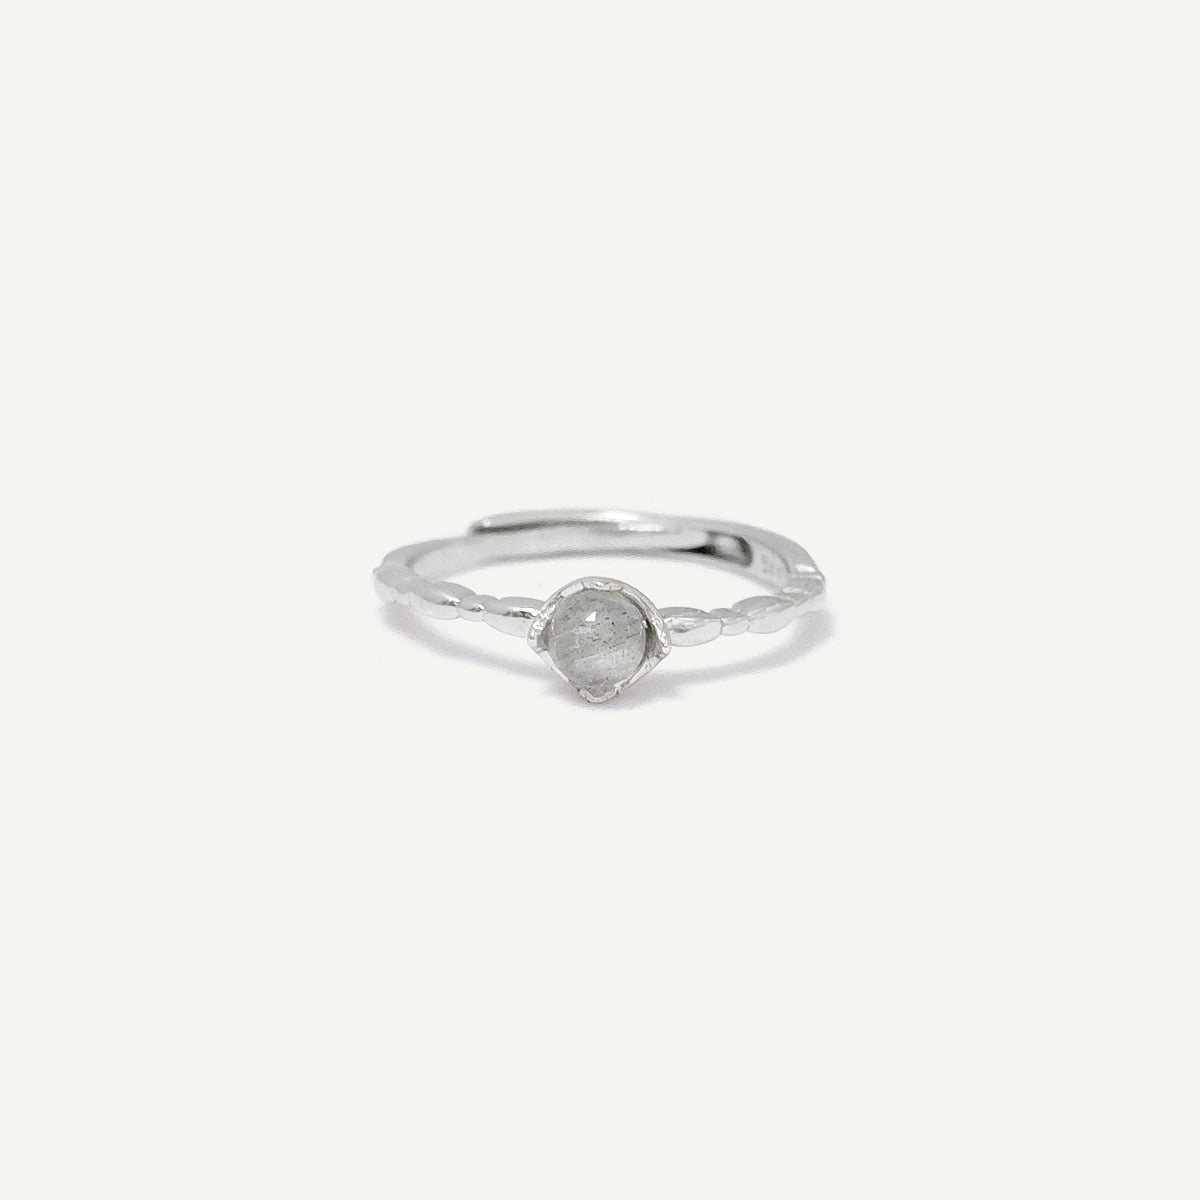 The Calming Moonstone Ring